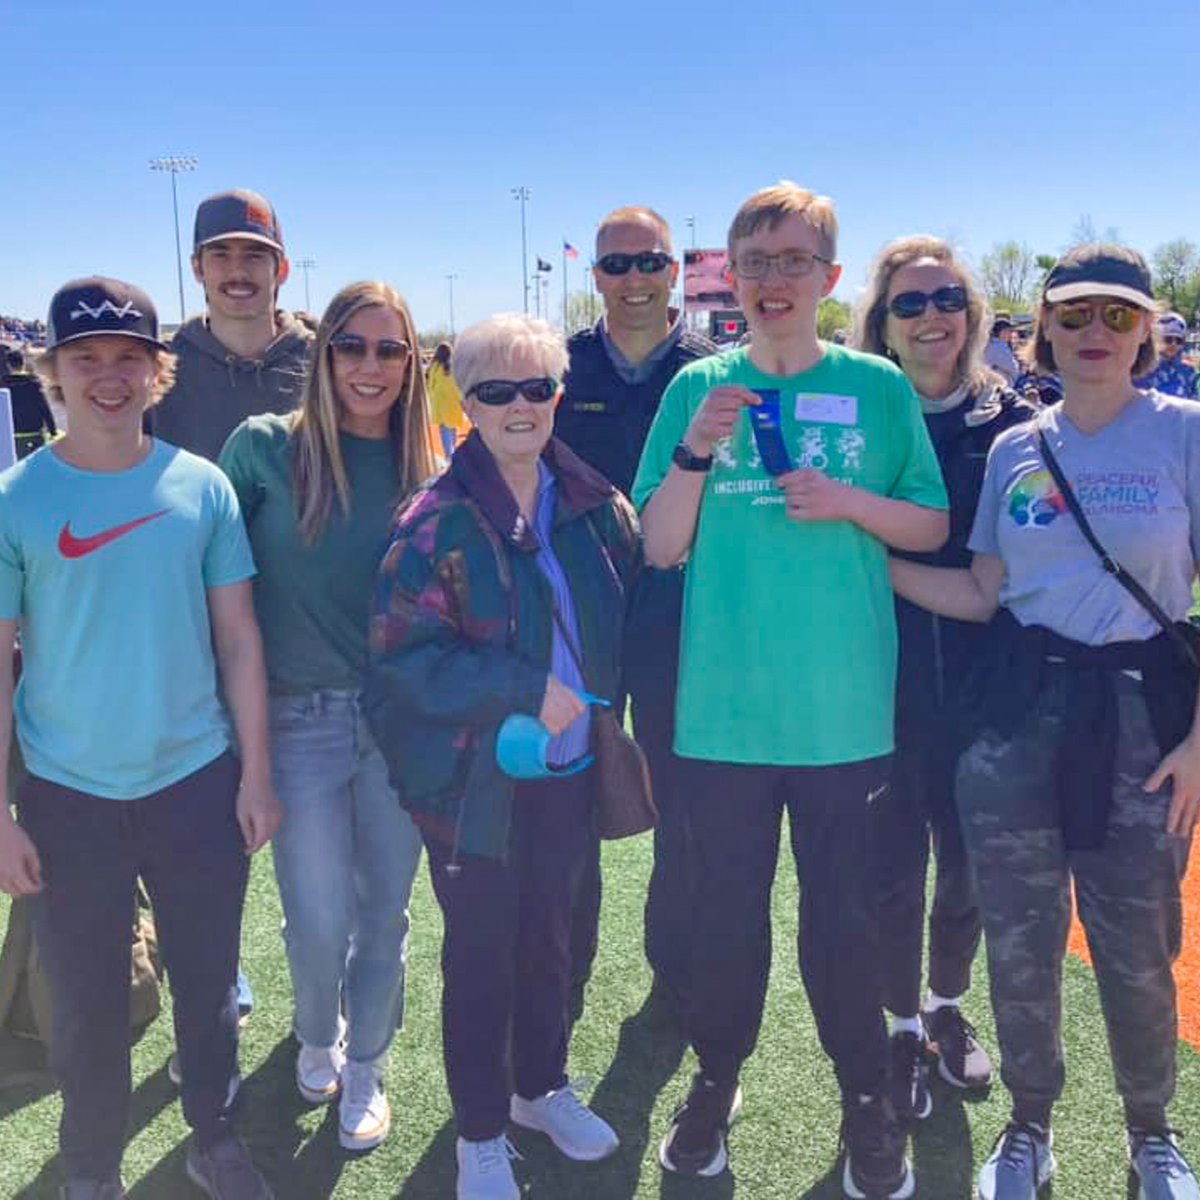 One year following his brain injury, former patient Levi is back in school + recently participated in the Oklahoma City Special Olympics, where he placed first in the 100-meter fast walk! Read Levi's story: bethanychildrens.org/levis-winning-… #Inspiration #Progress #BethanyChildrens